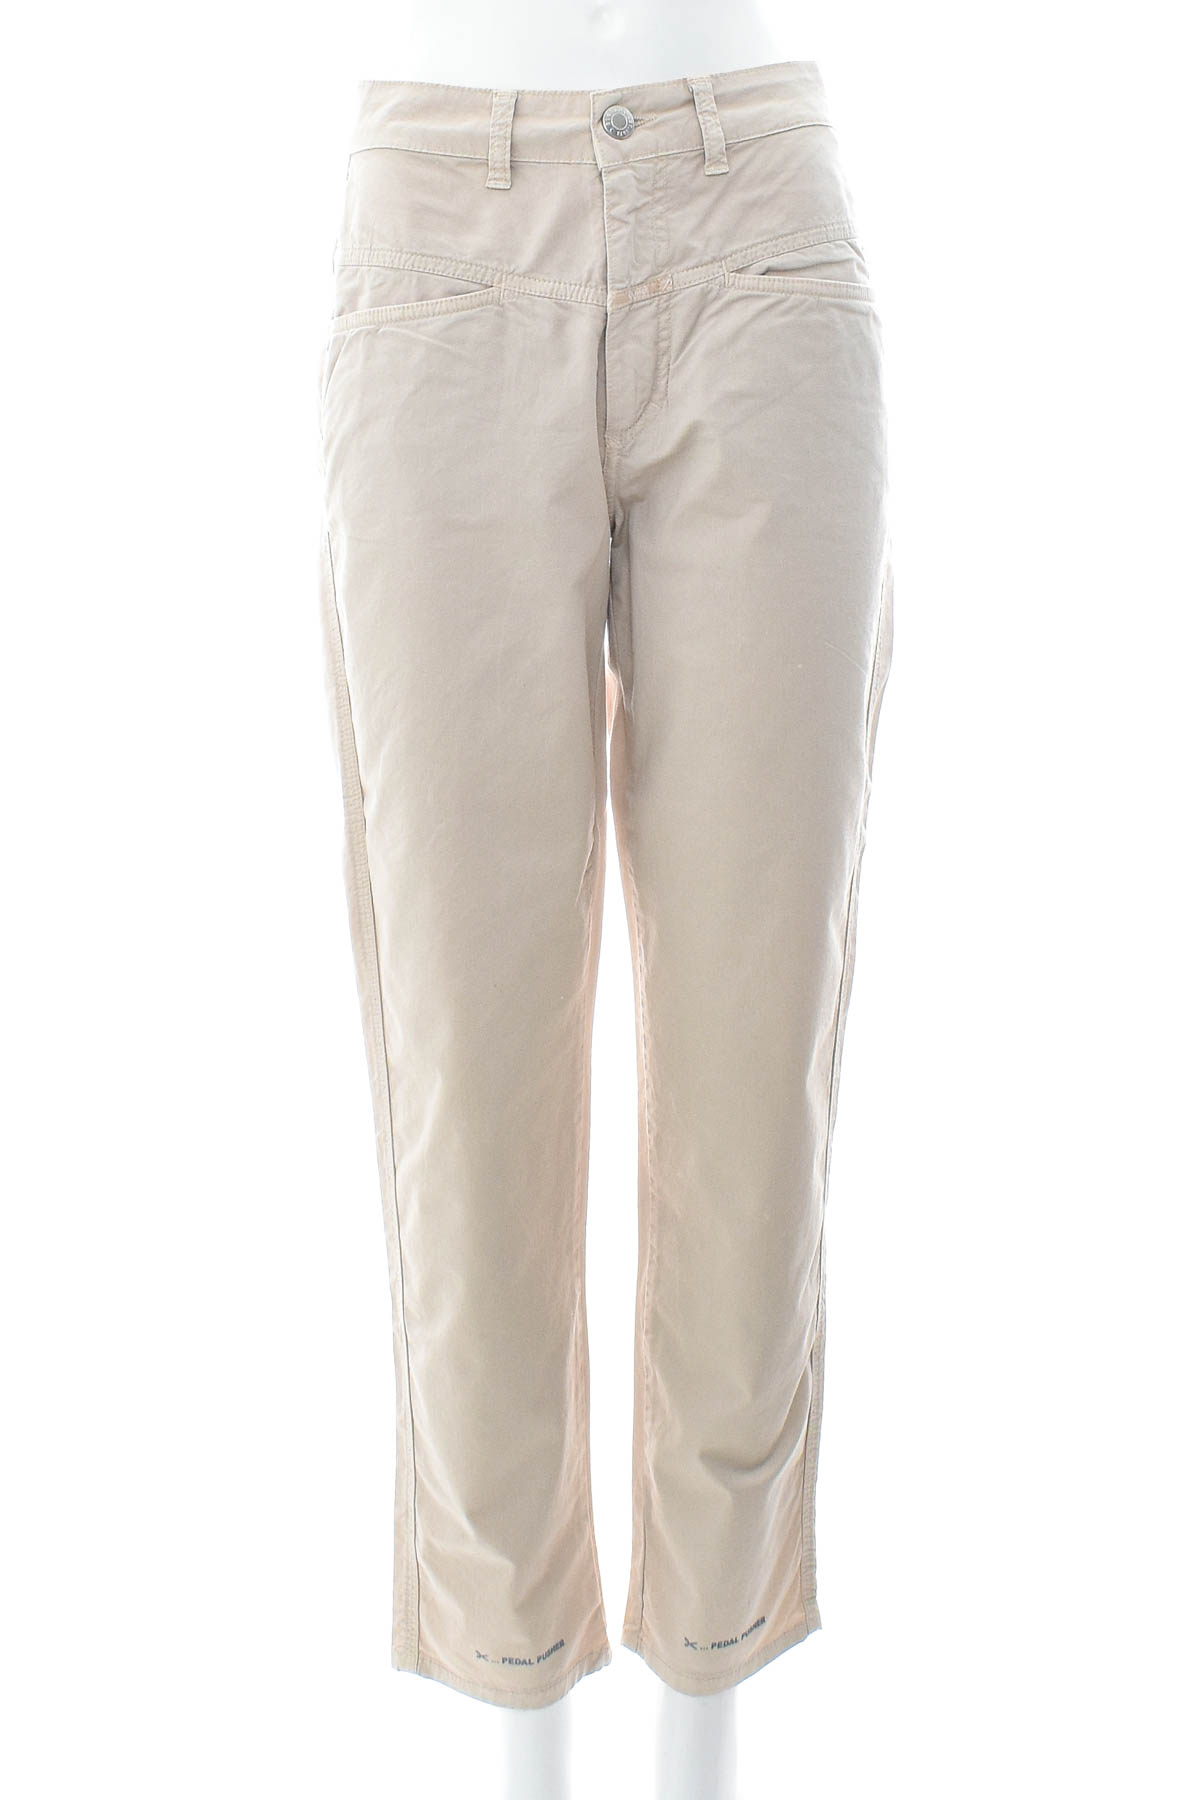 Women's trousers - CLOSED - 0